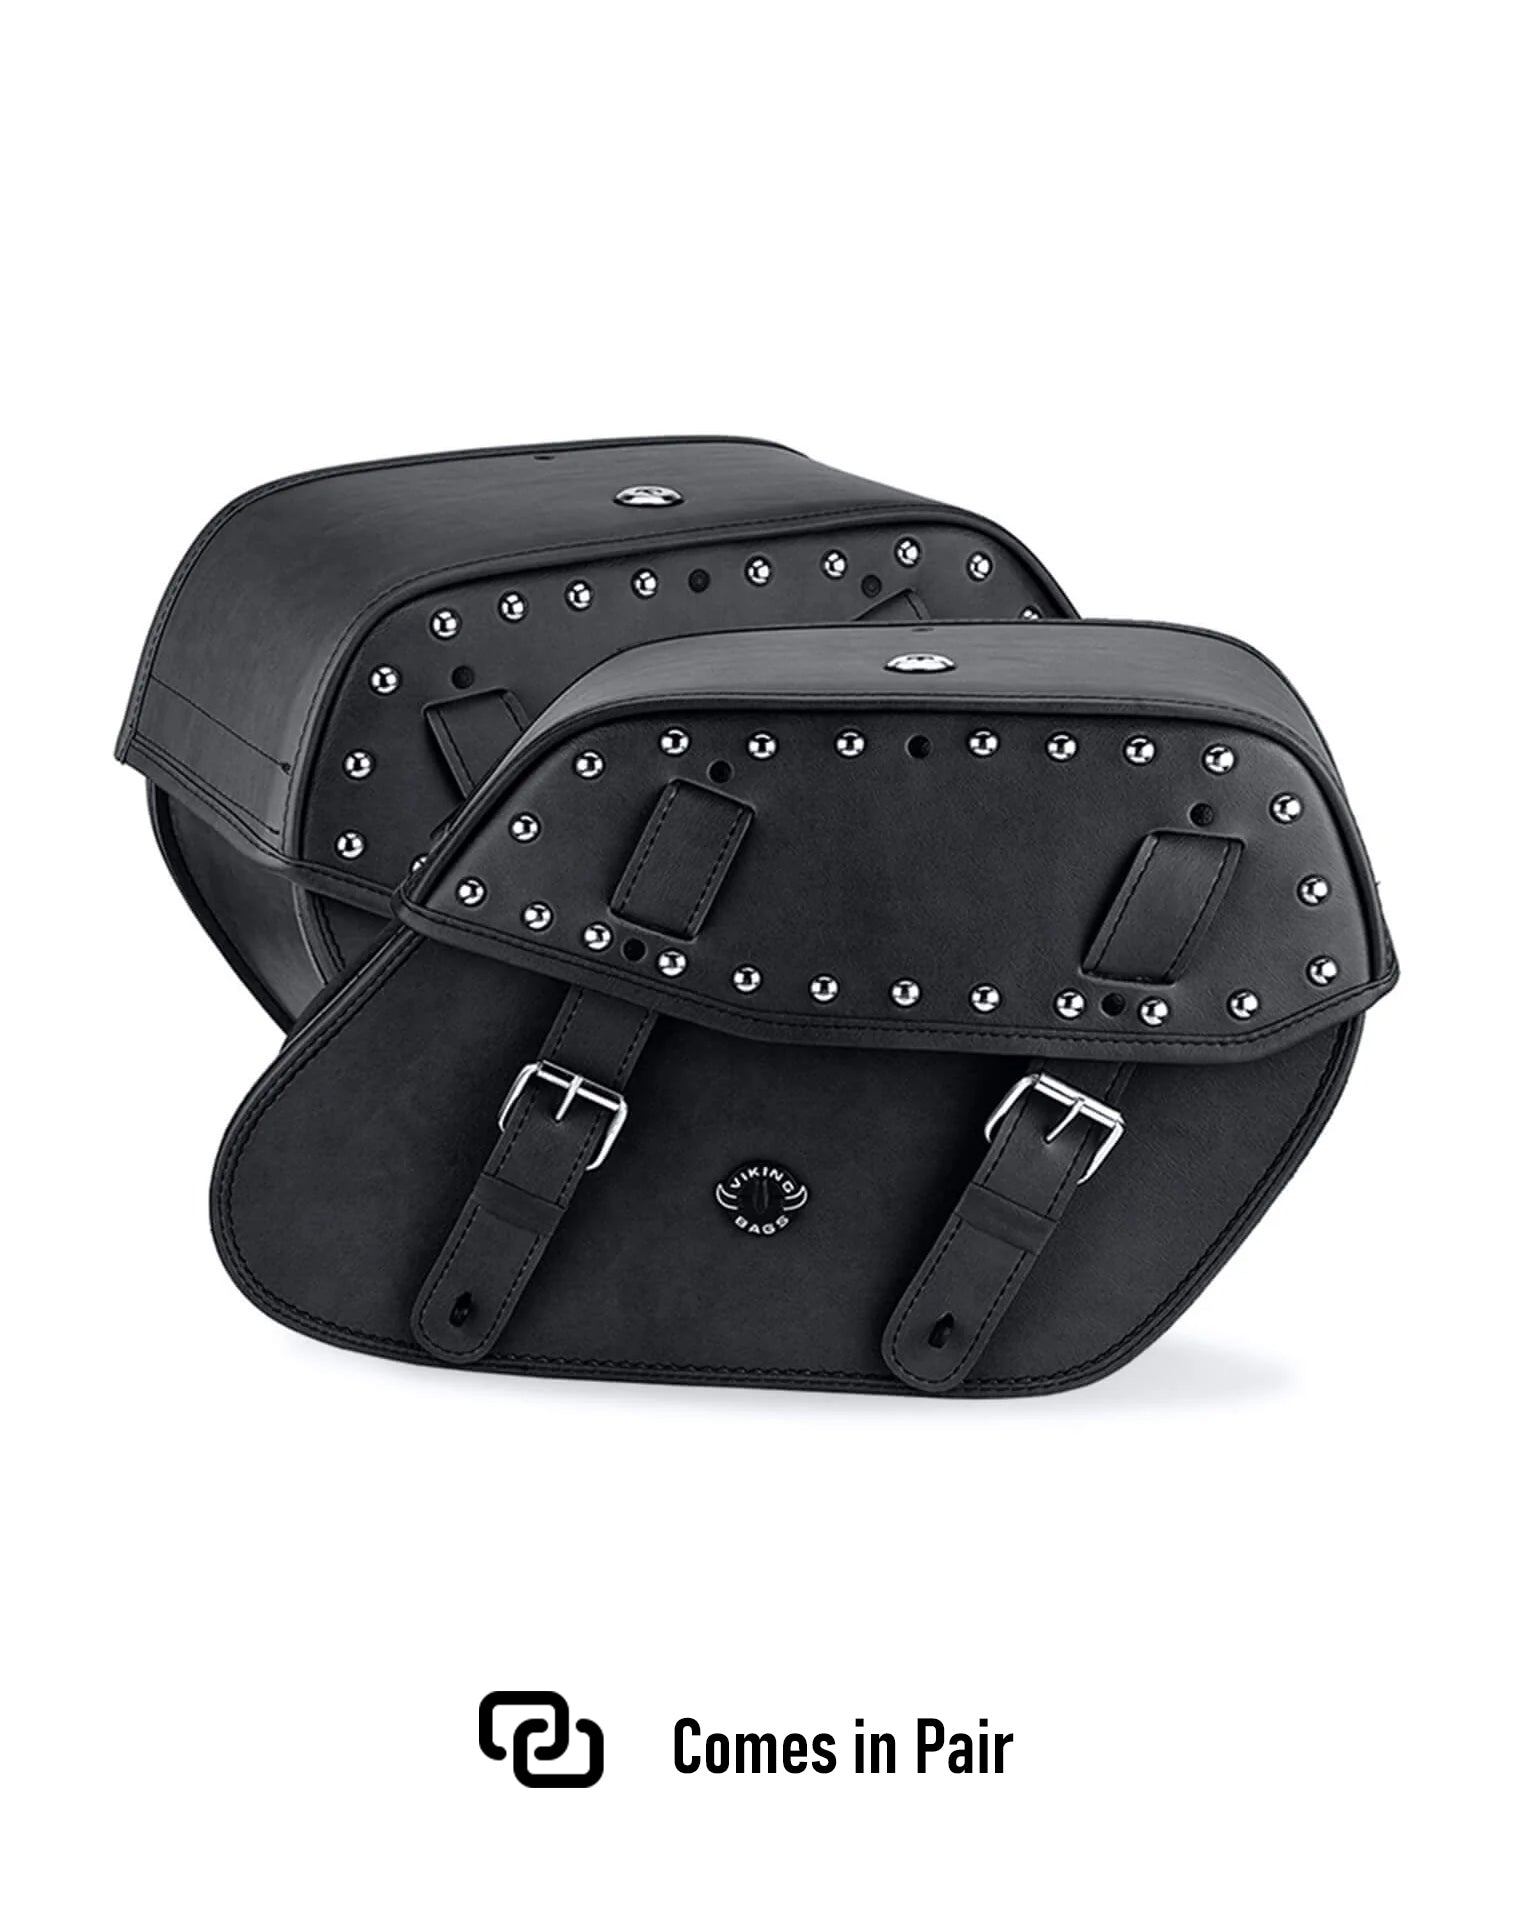 Viking Odin Large Kawasaki Mean Streak 1500 Studded Leather Motorcycle Saddlebags Weather Resistant Bags Comes in Pair